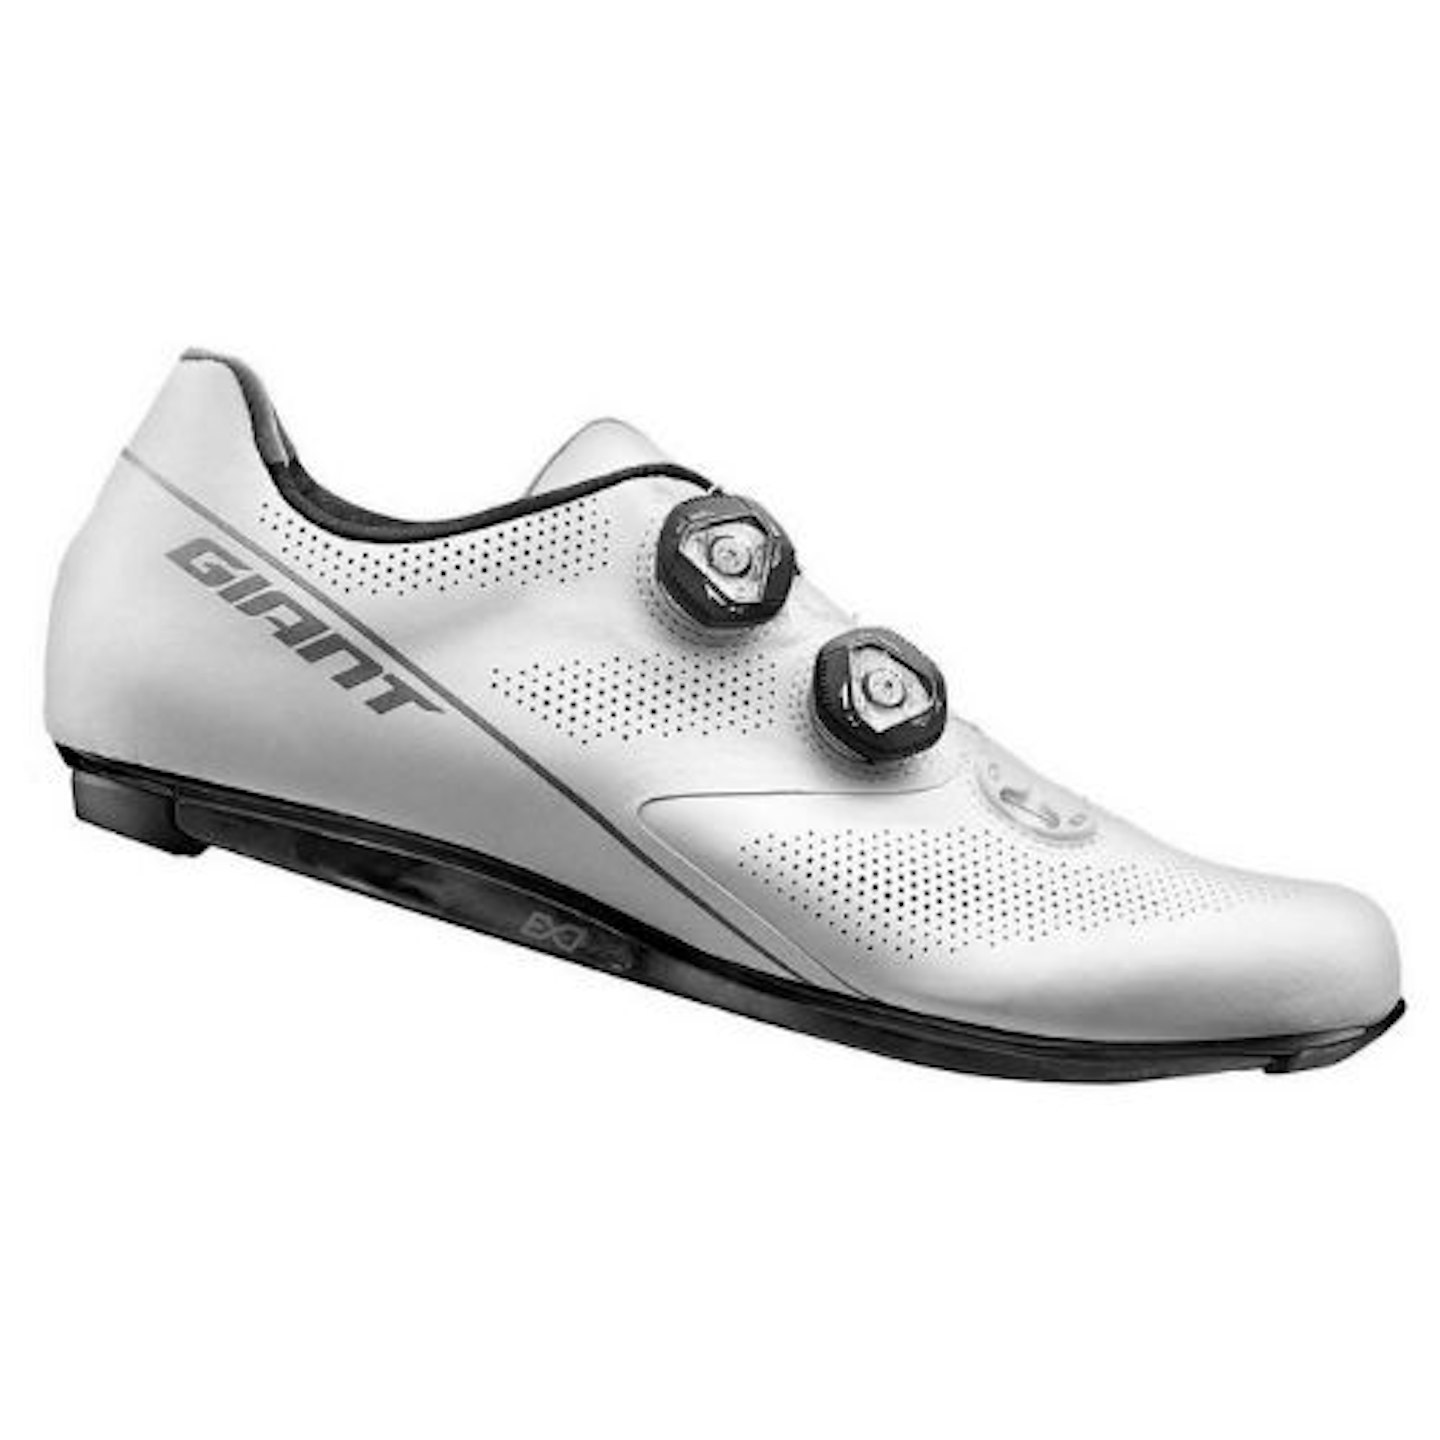 Giant Surge Pro Road Shoes in White